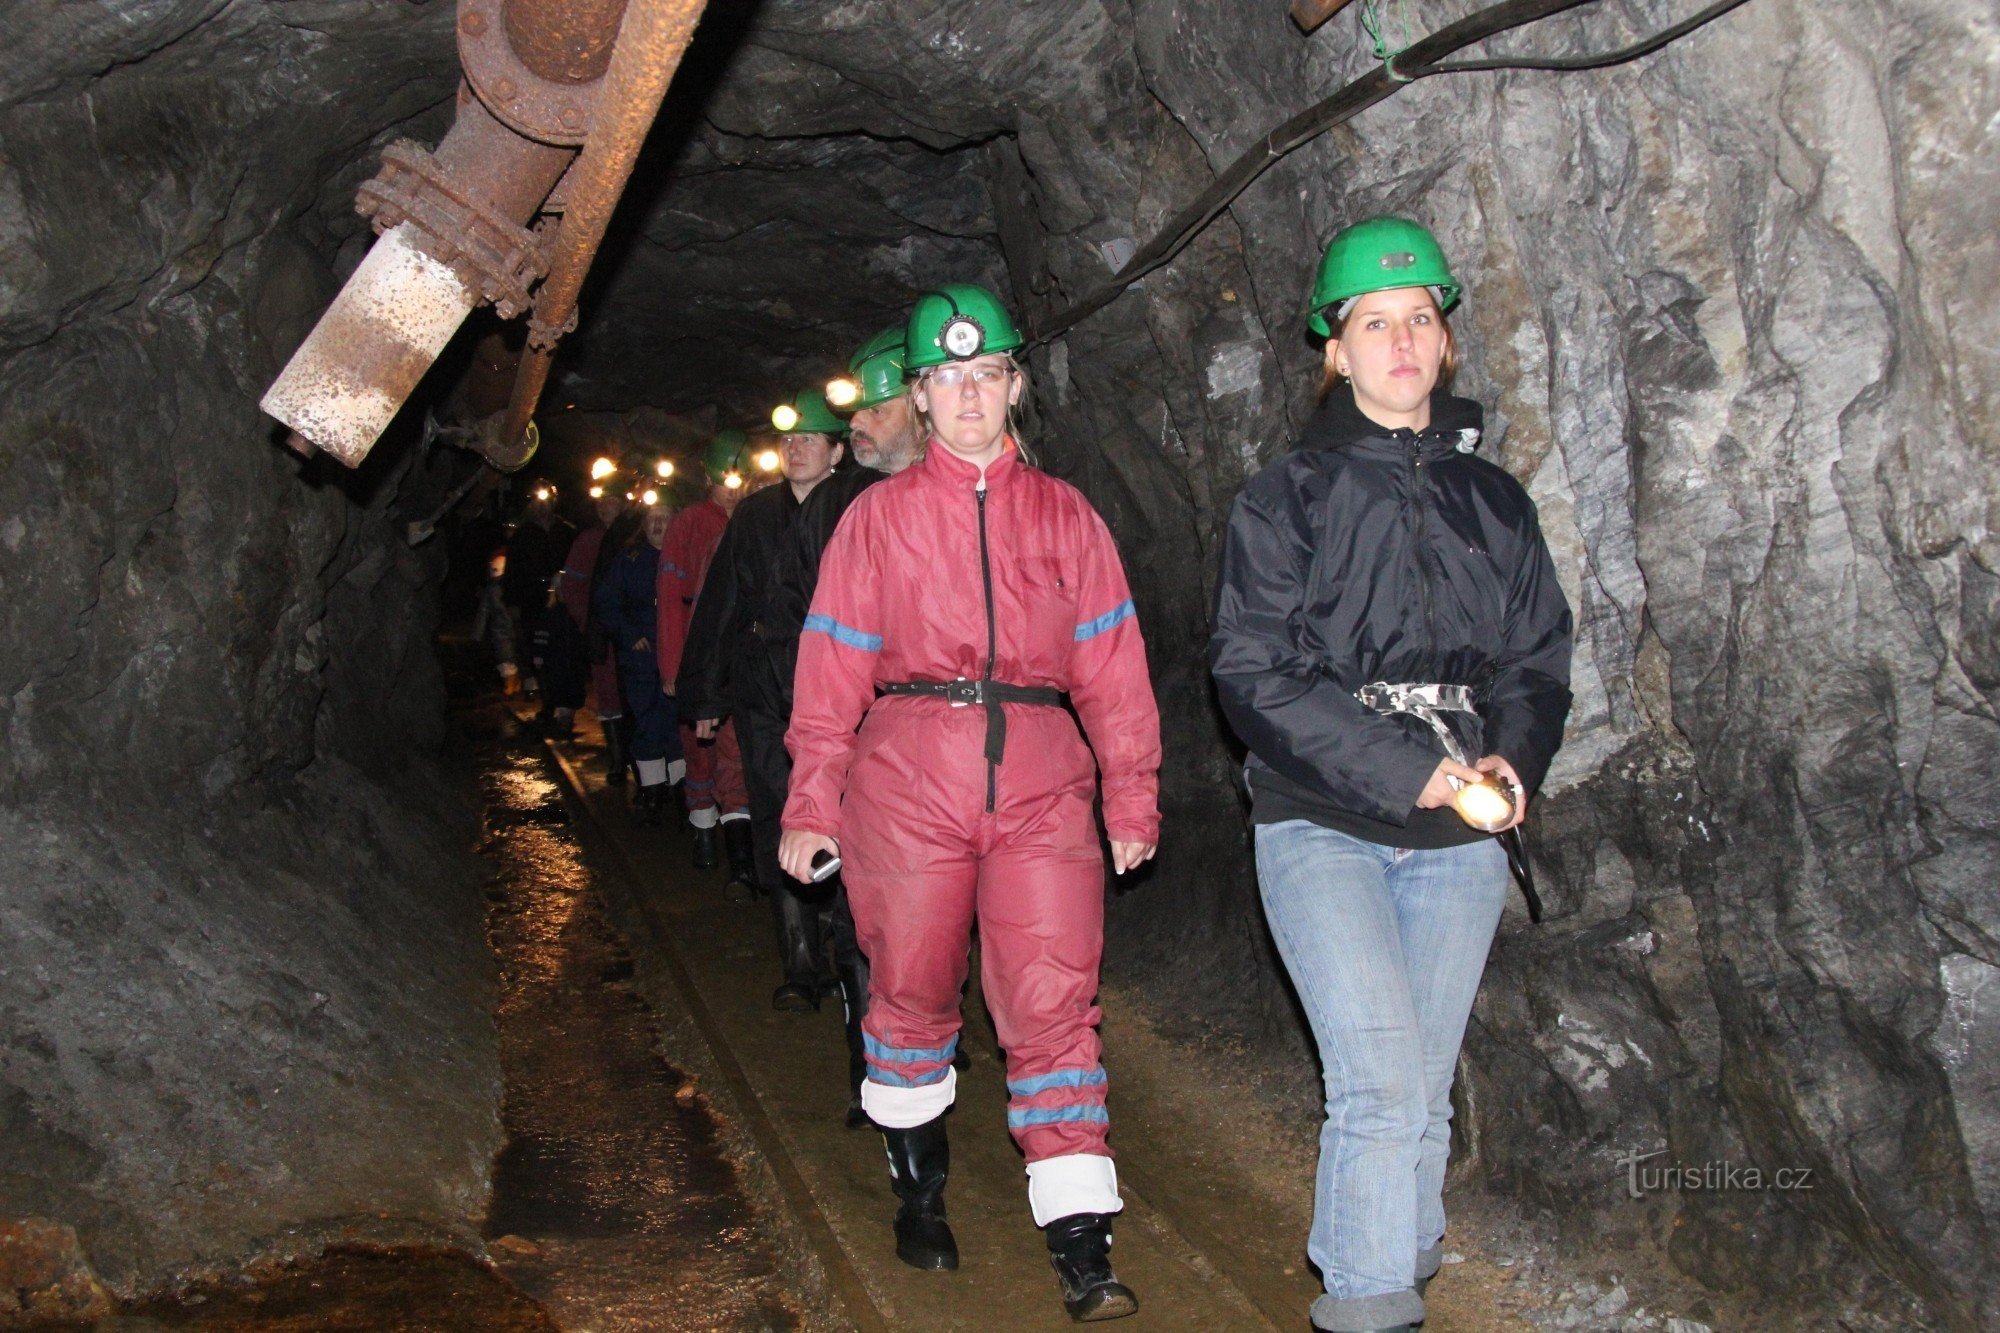 down in the mine